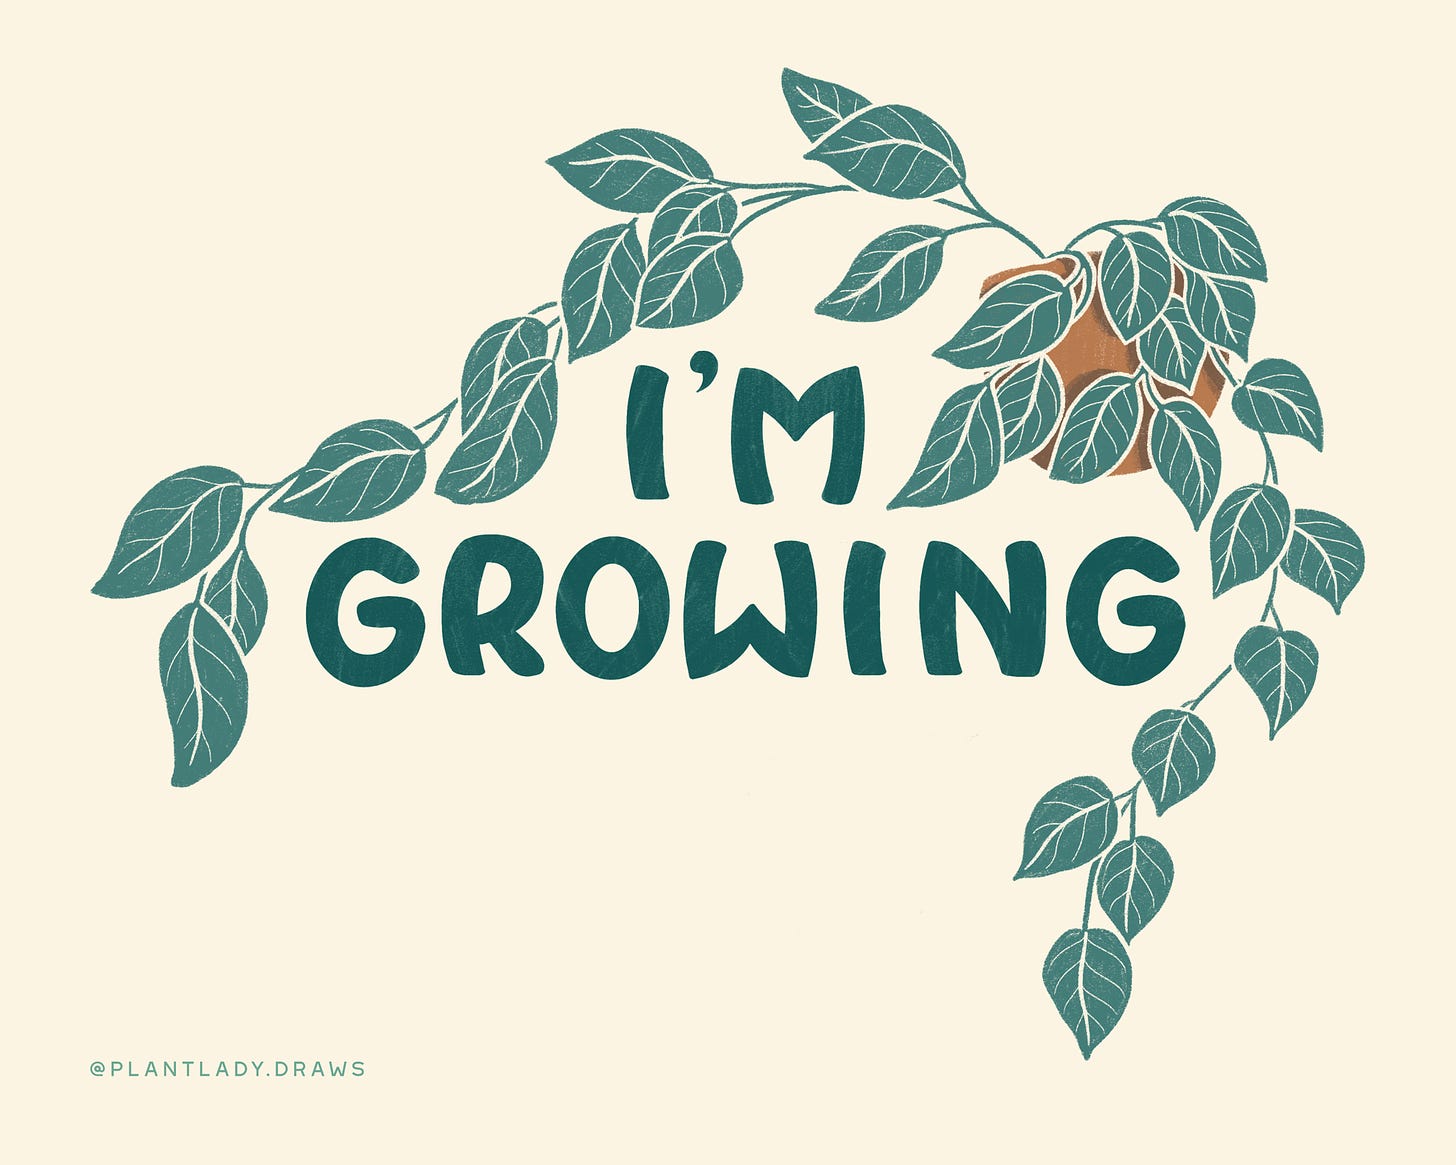 Illustration with the handlettered words "I'm growing" in capital letters. The words are surrounded by a vining plant with leaves that start from a pot in the top right corner and grow down its sides.